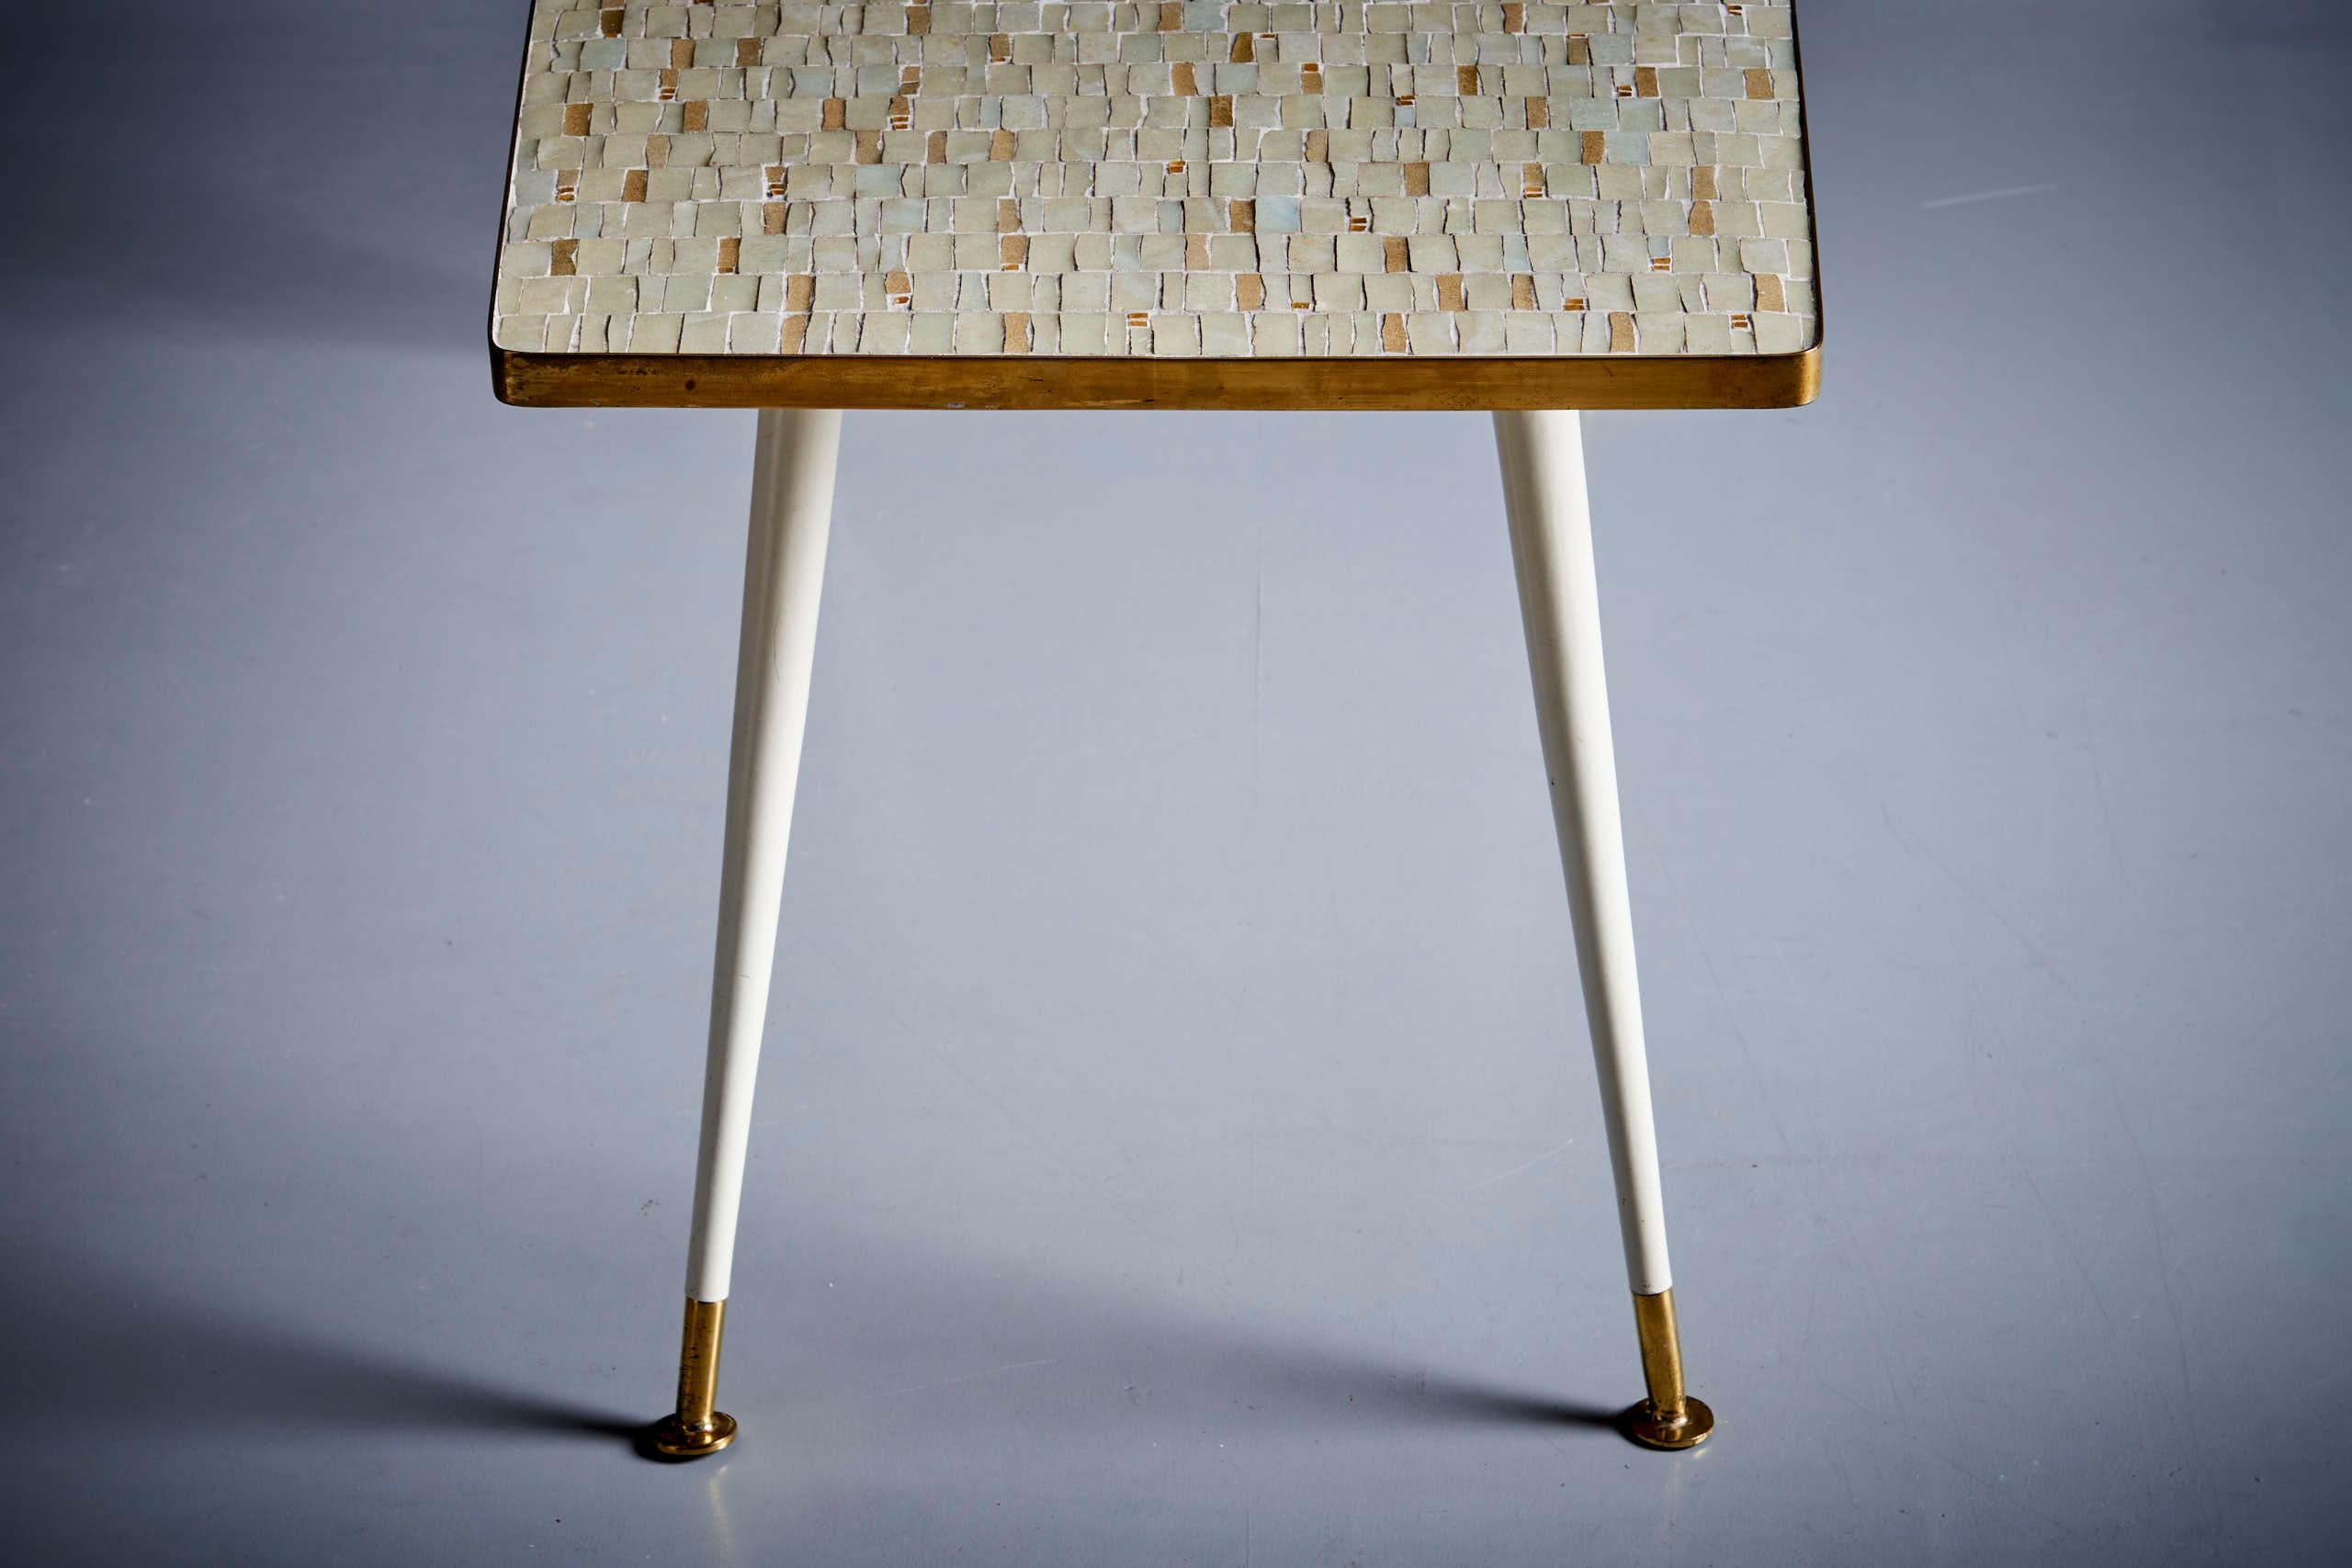 Mosaic Coffee Table with glamorous Gustav Klimt Aesthetic Germany - 1950s For Sale 2